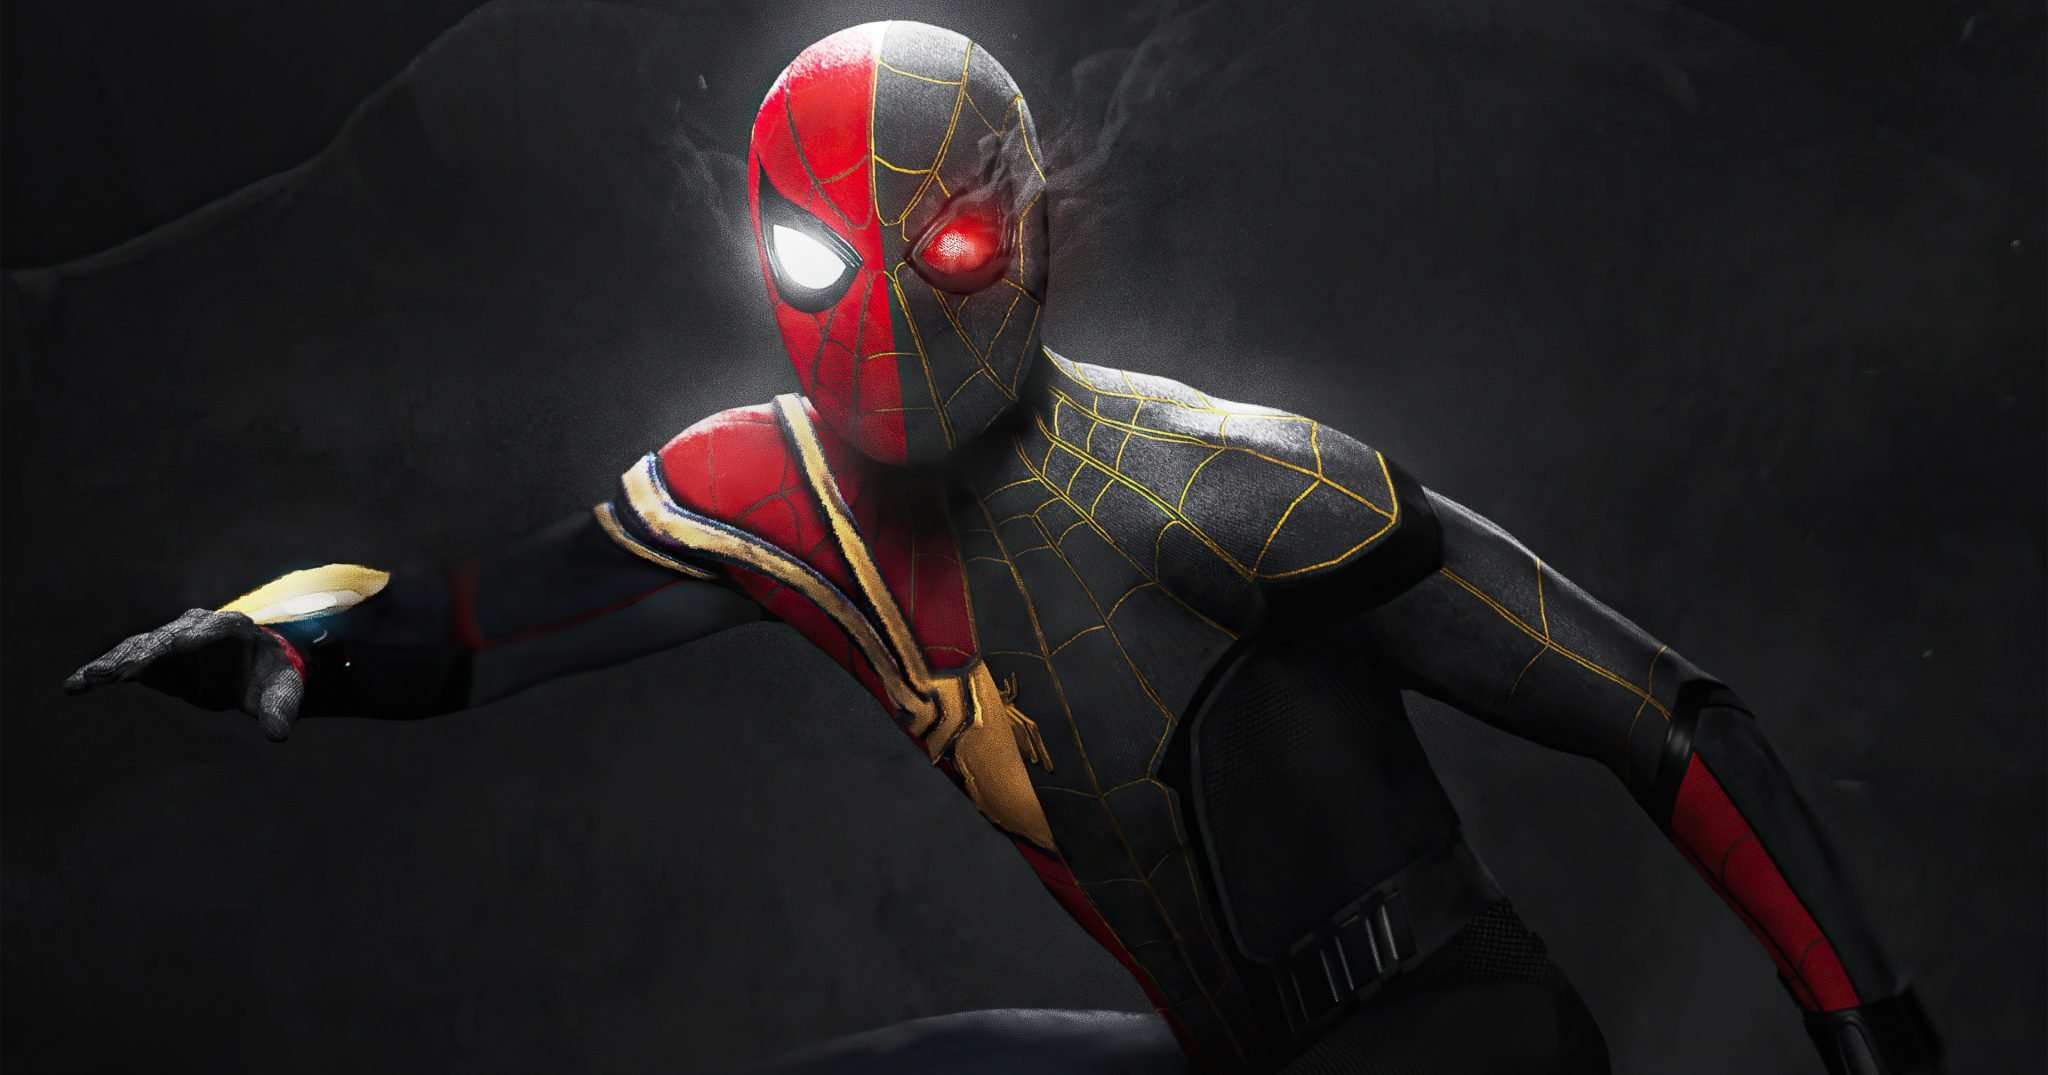 Spider-Man: No Way Home download the last version for mac